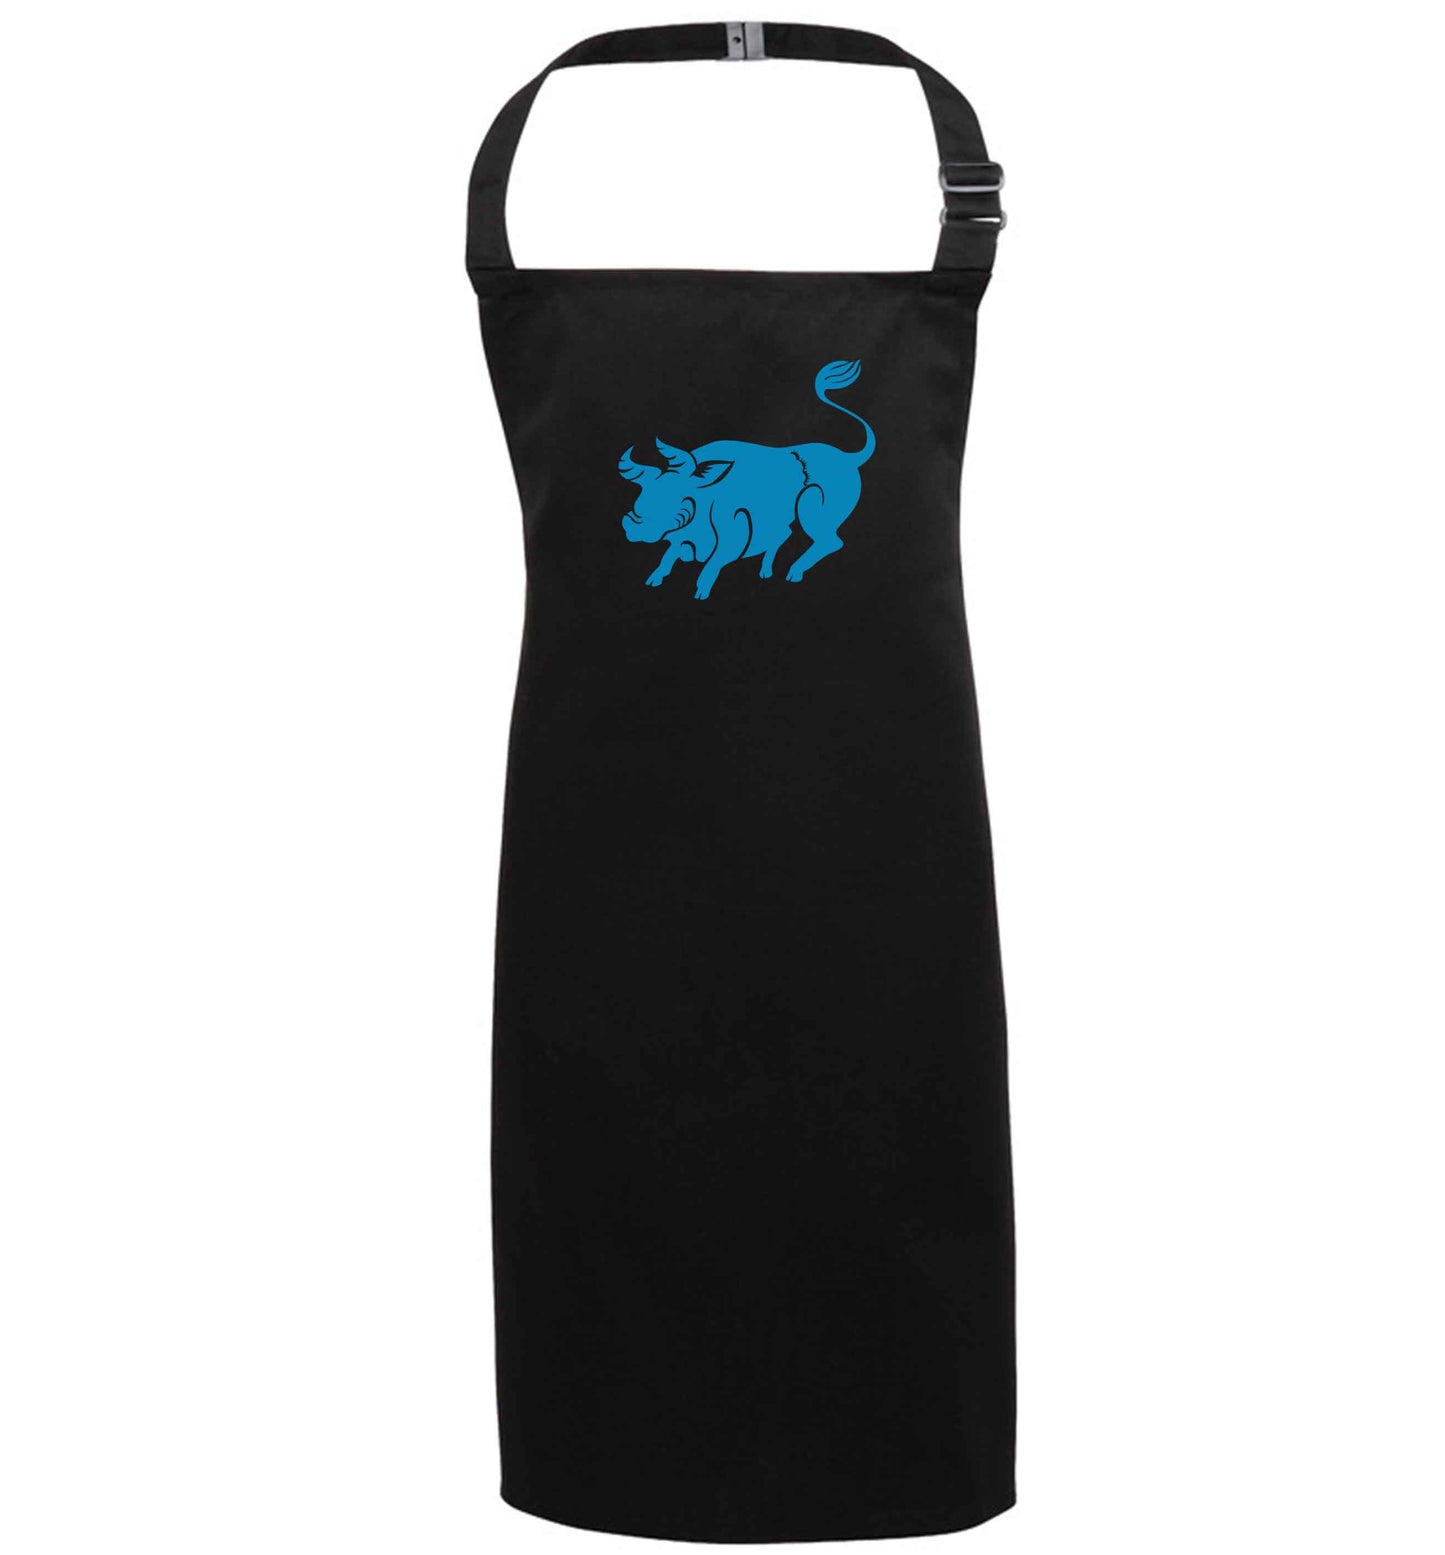 Pig face black apron 7-10 years